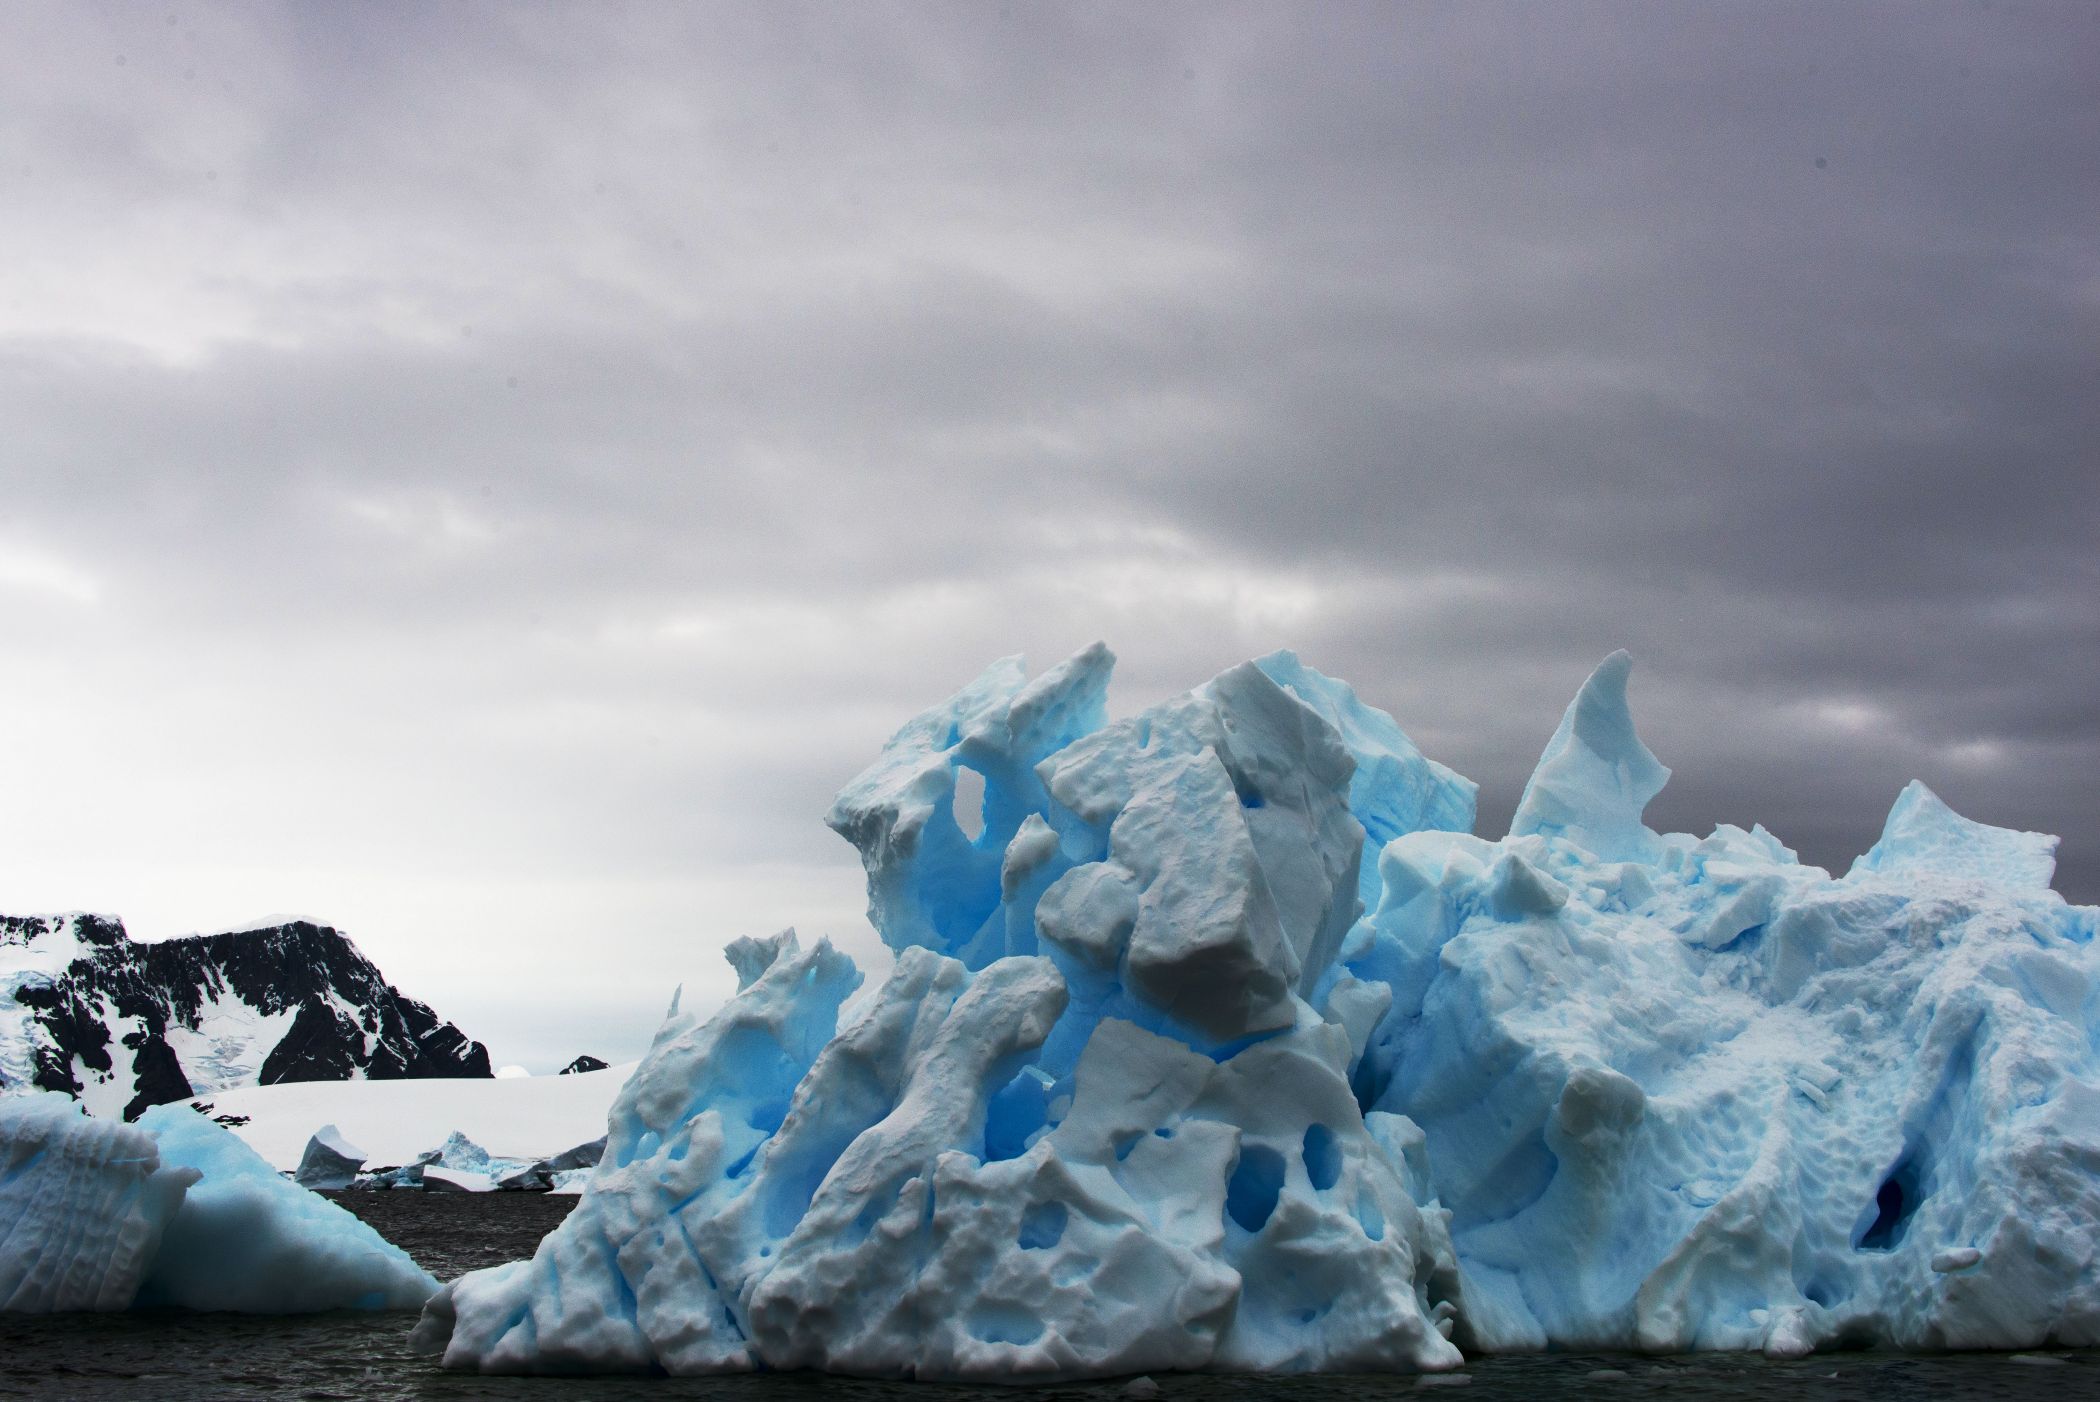 A Photographic Gallery - Landscapes: Icebergs and Pack-ice in the ...